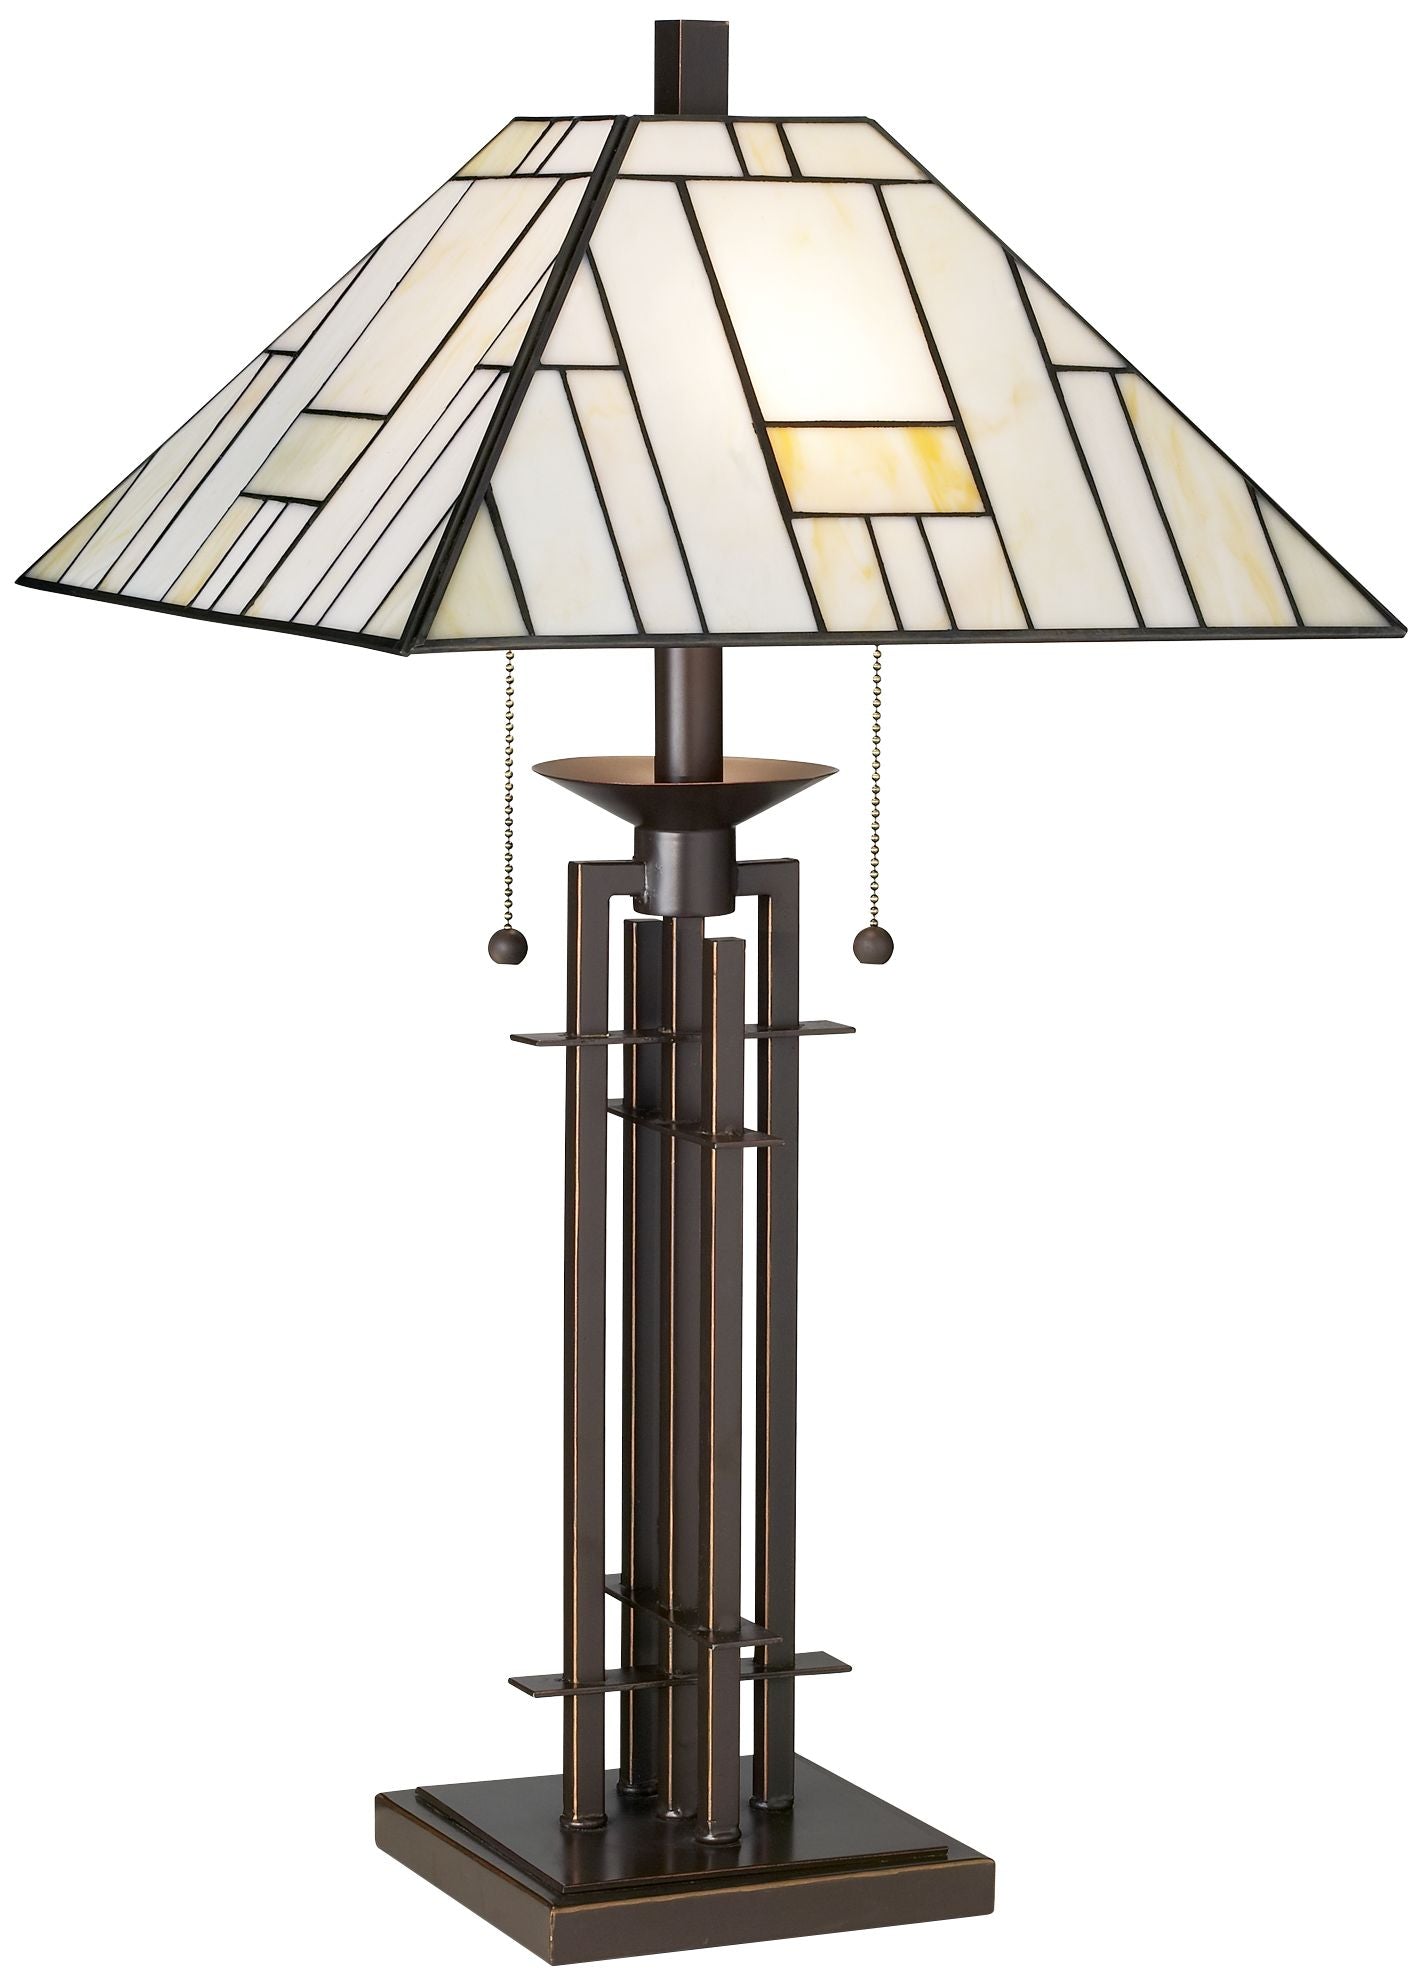 Franklin Iron Works Mission  Style Table Lamp with Table Top Dimmer 26.5" High Bronze Wrought Iron Stained Glass Shade for Living Room Bedroom